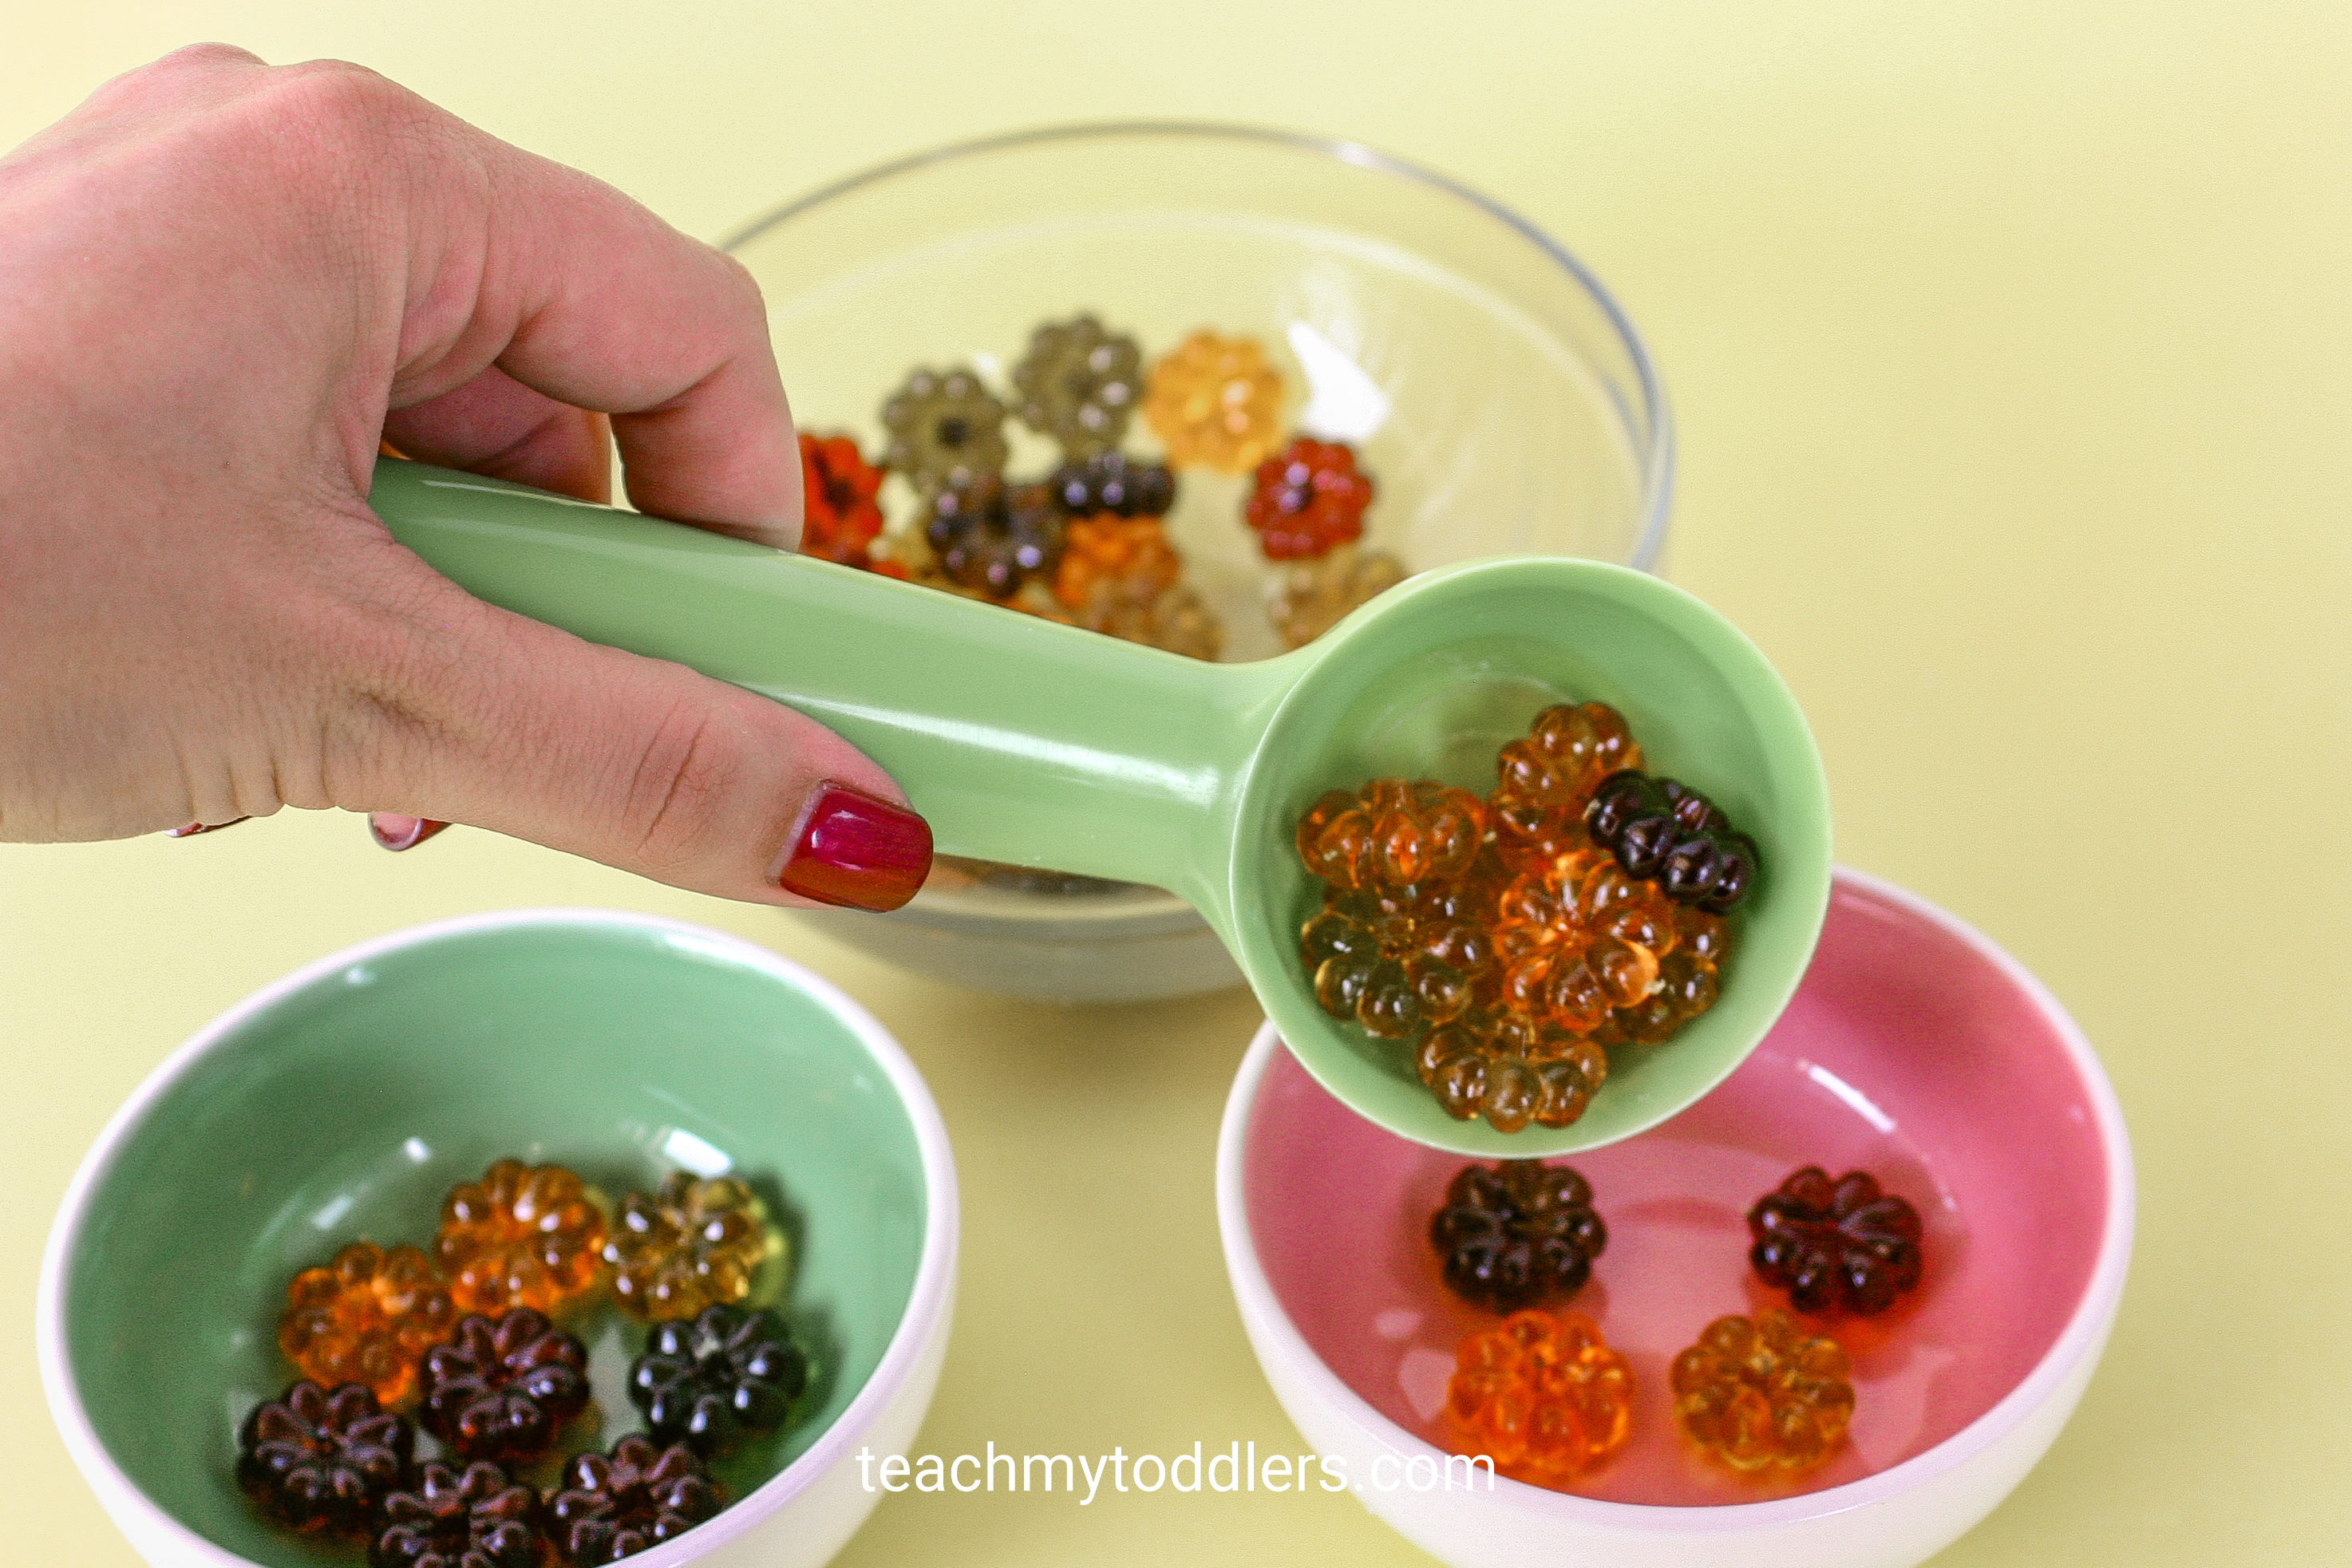 Learn how to use these awesome table scatter activities to teach toddlers math